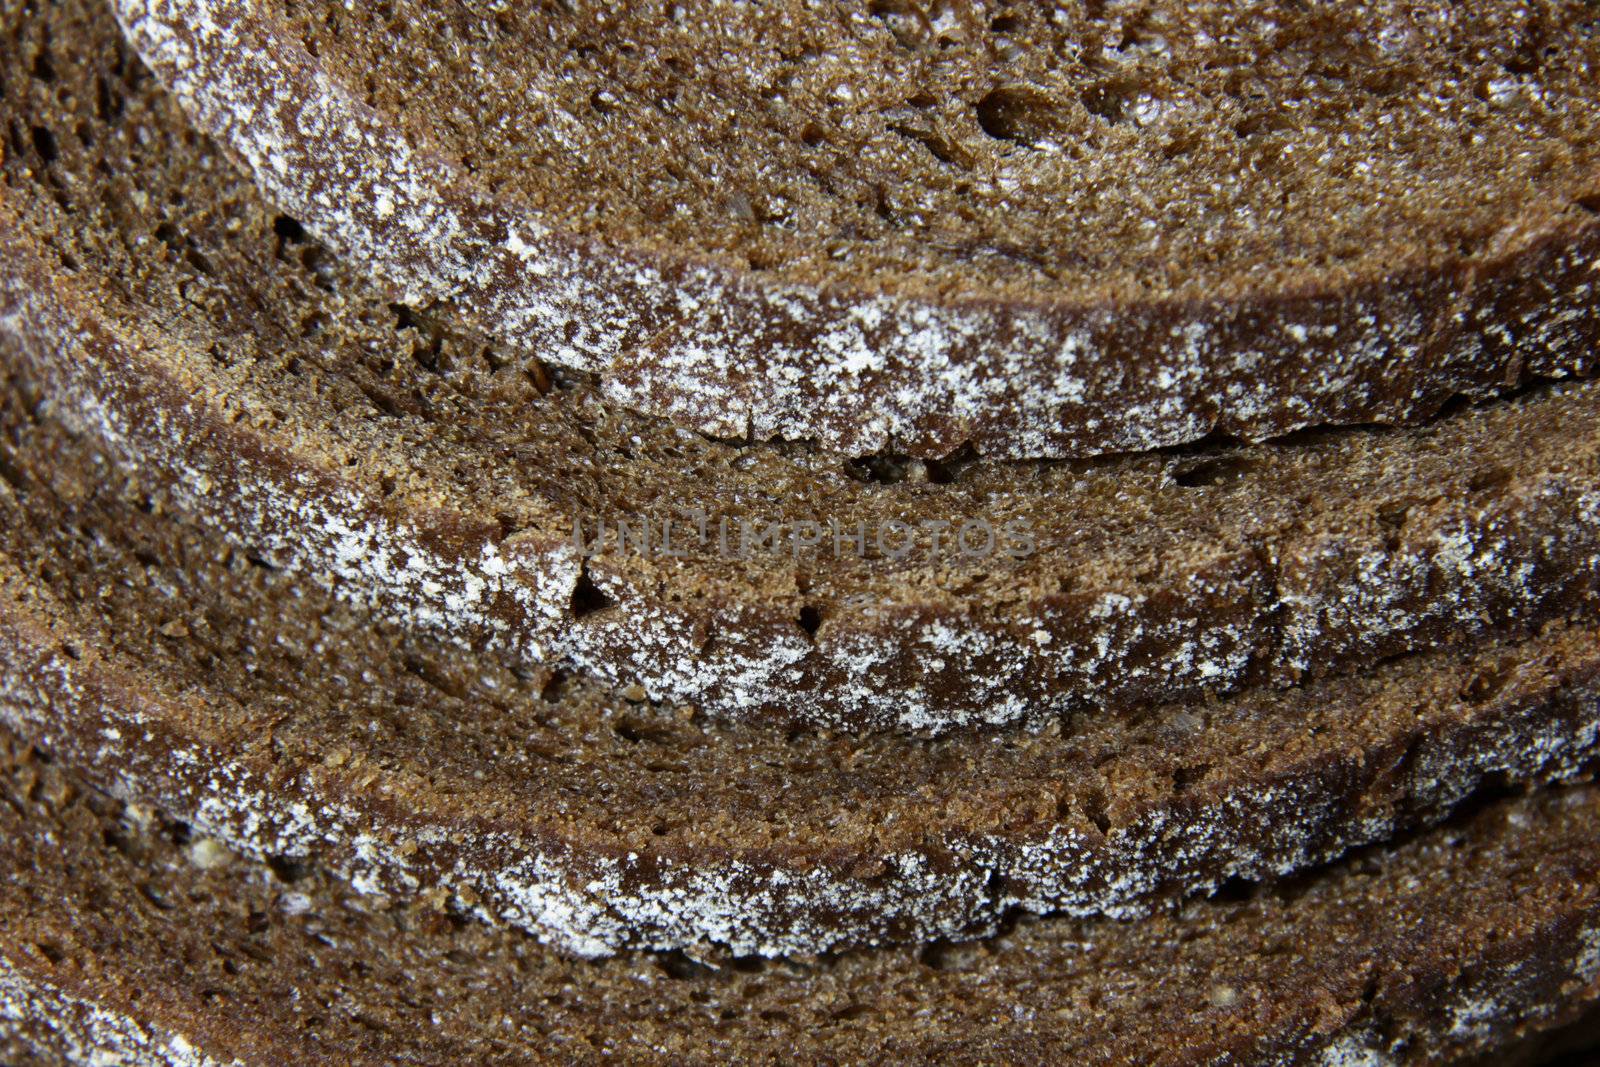 A close-up of the crusts of five slices of pumpernickel bread.
